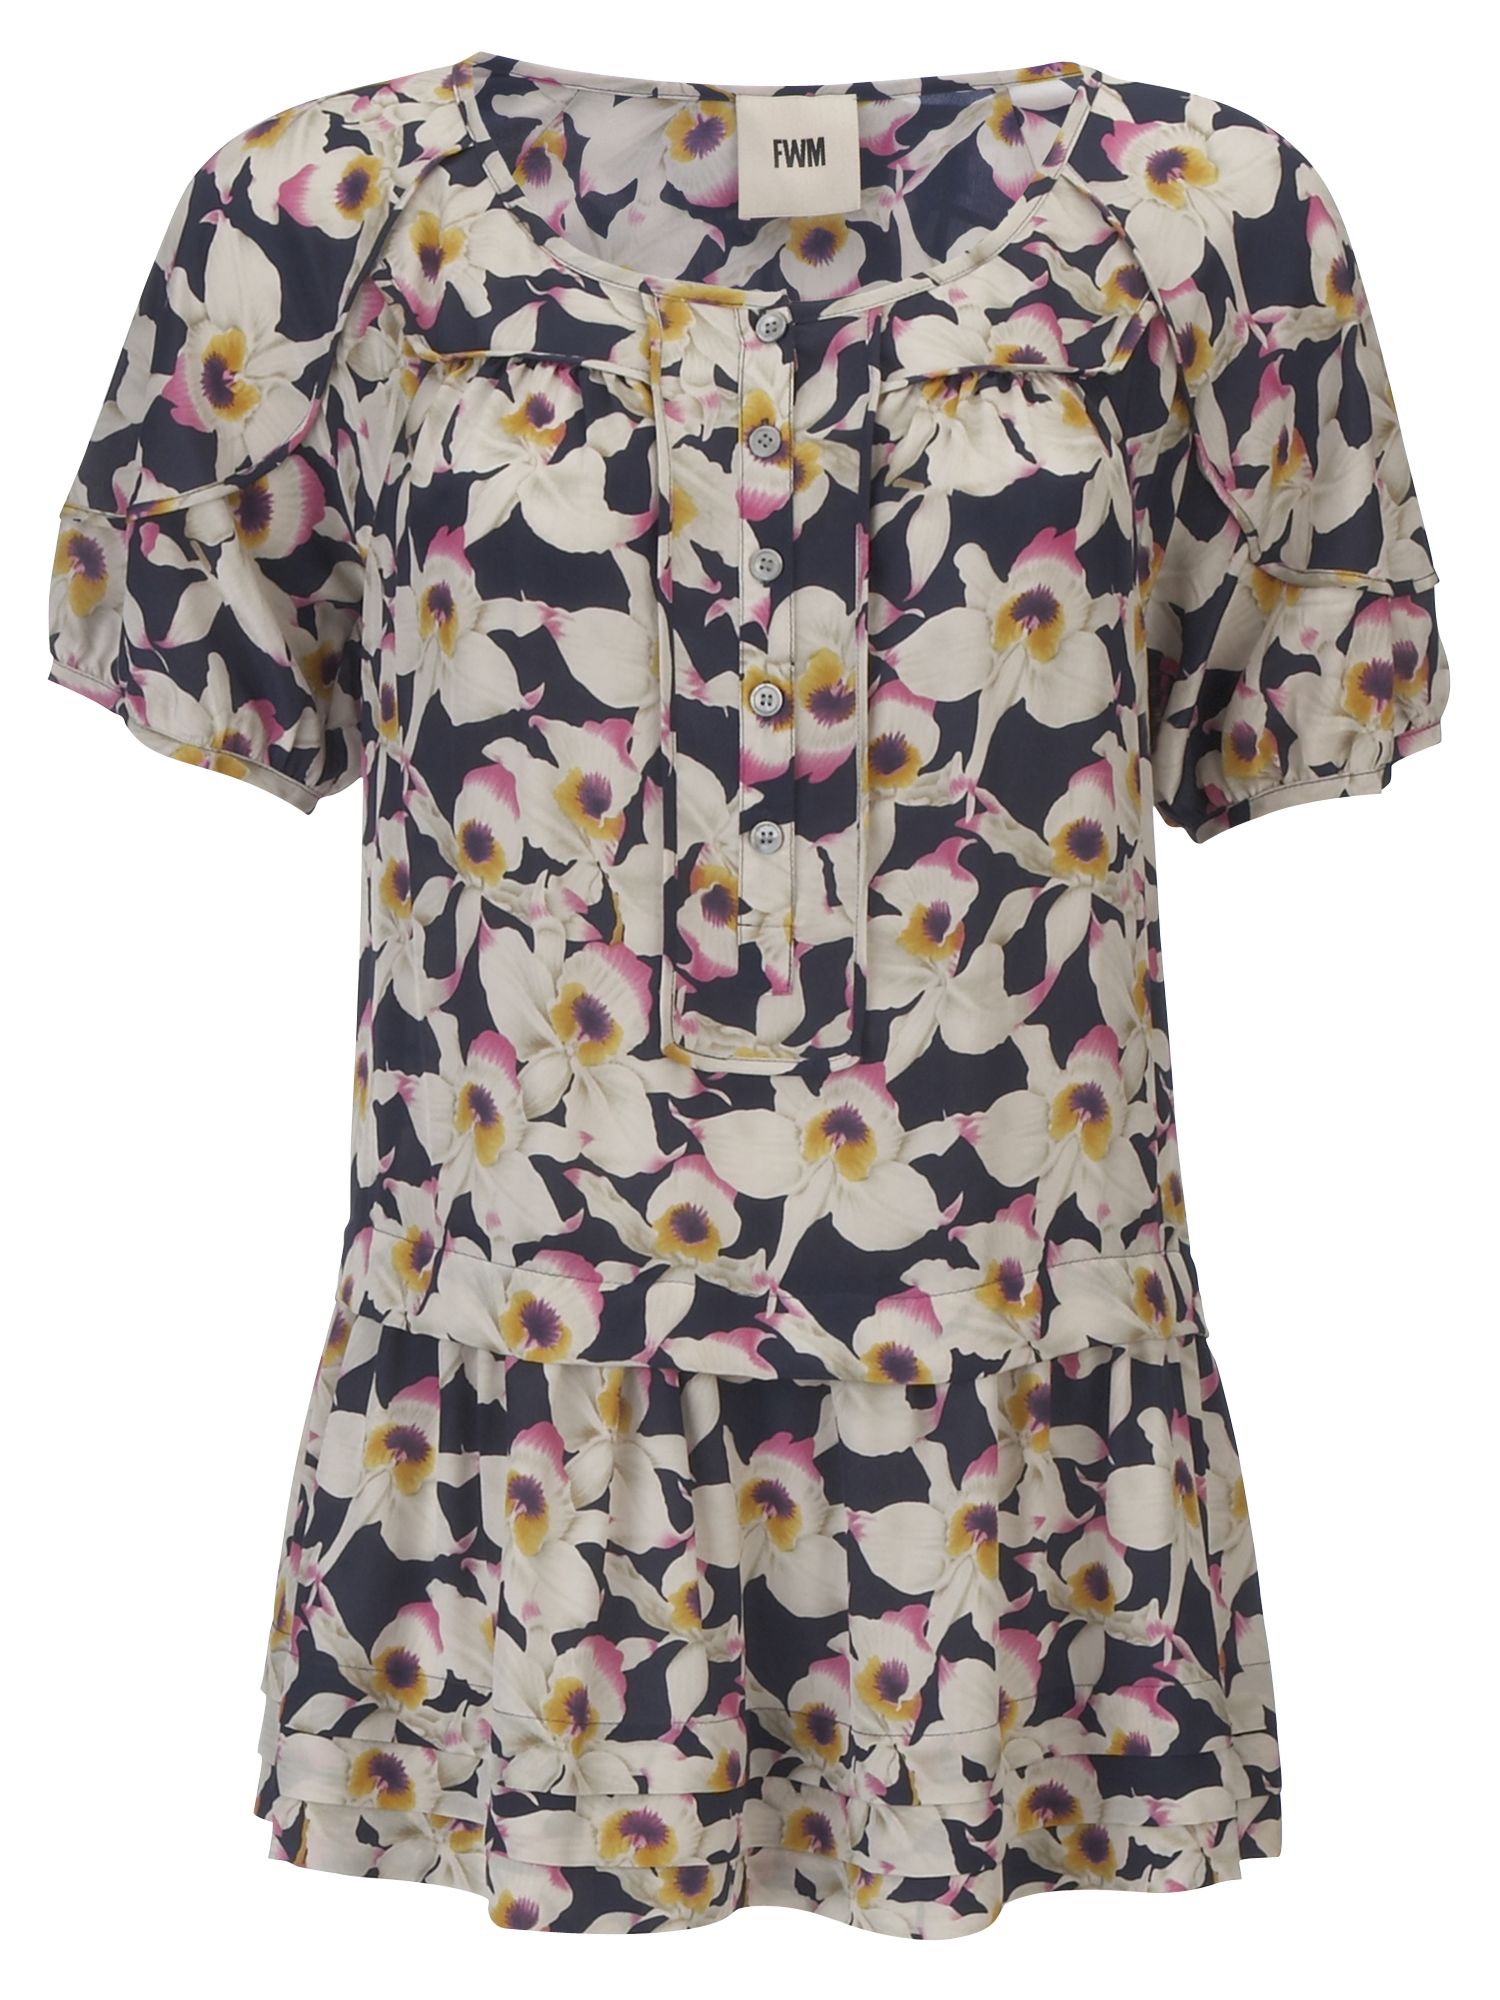 FWM Orchid Print Frill Blouse, Navy combo